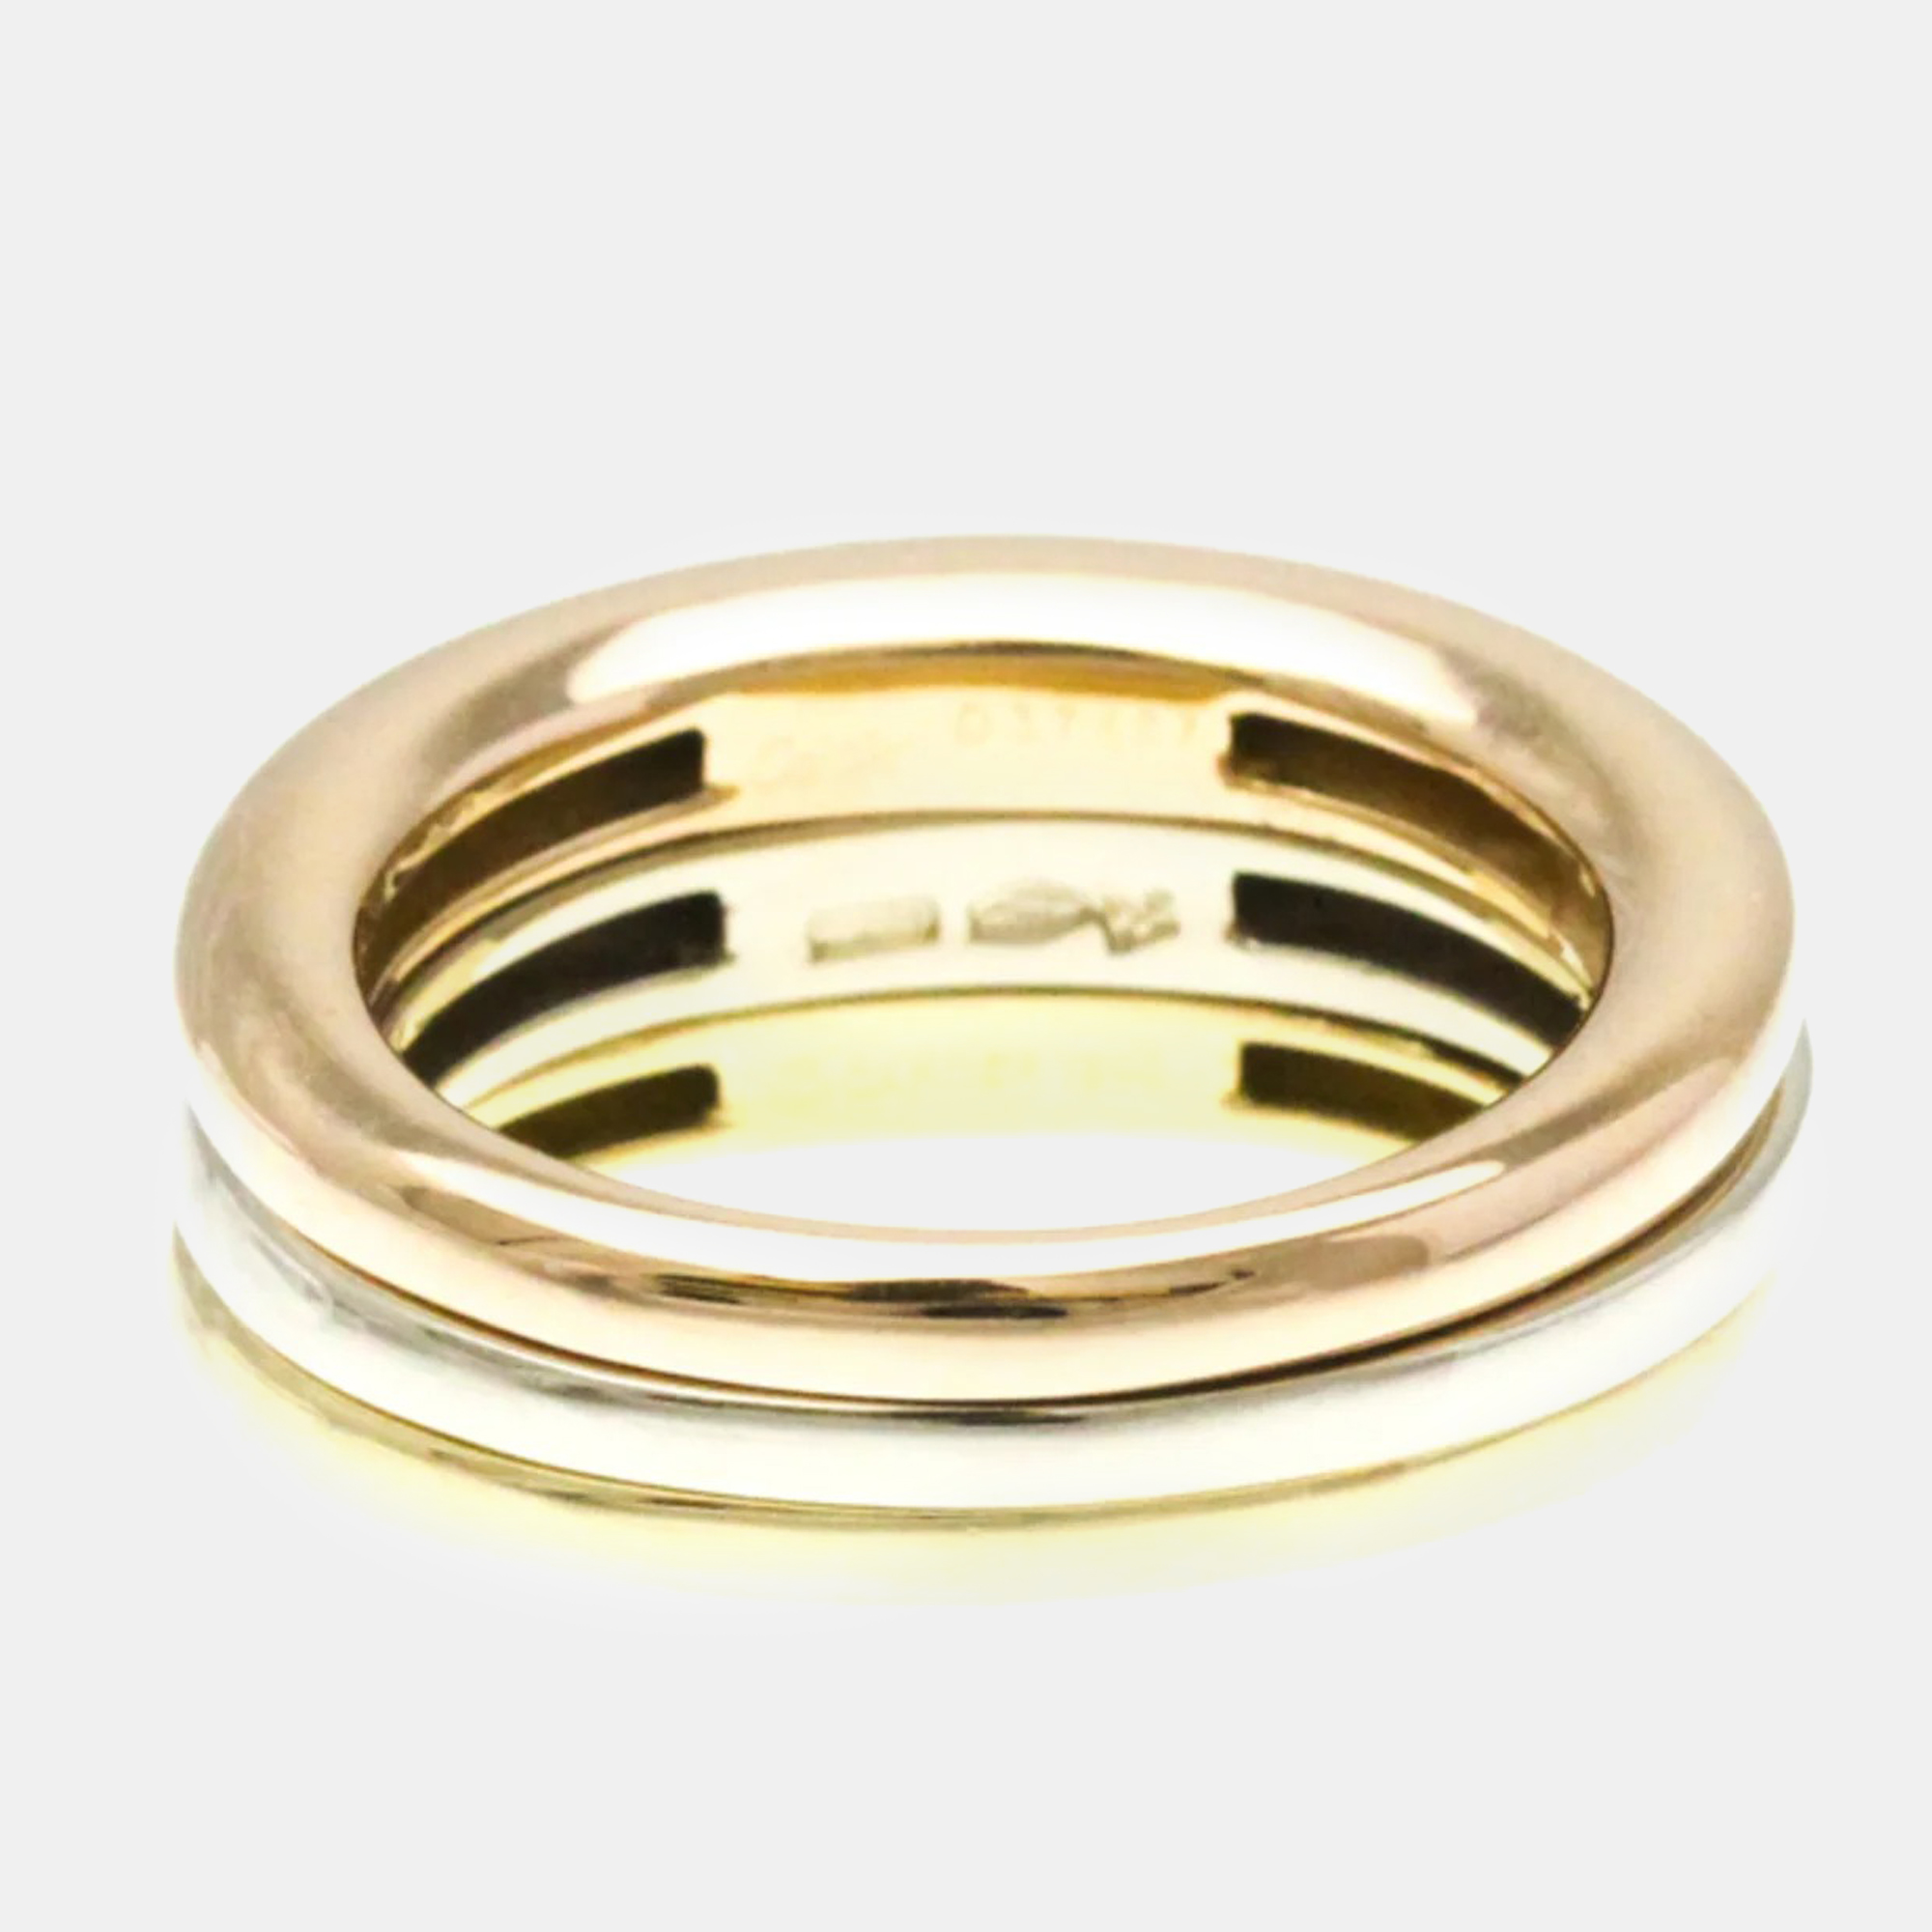 Cartier 18k yellow, rose, white gold trinity stack band ring eu 54